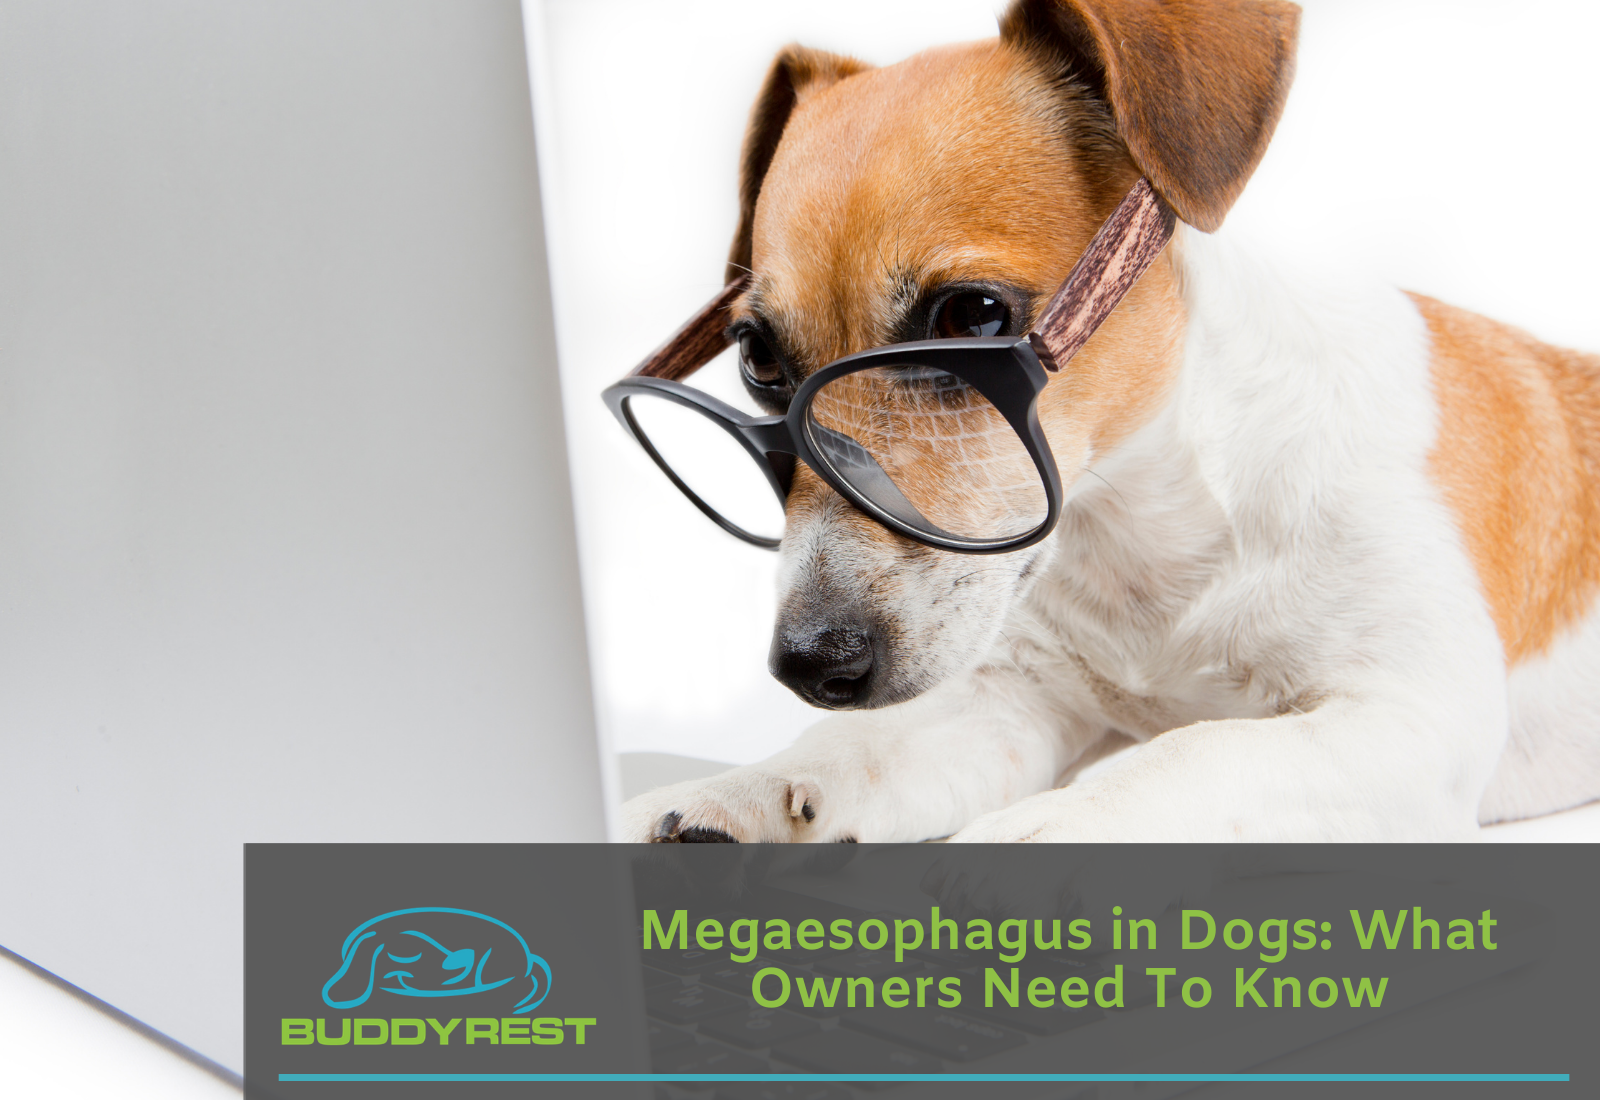 Megaesophagus in Dogs: What Owners Need To Know